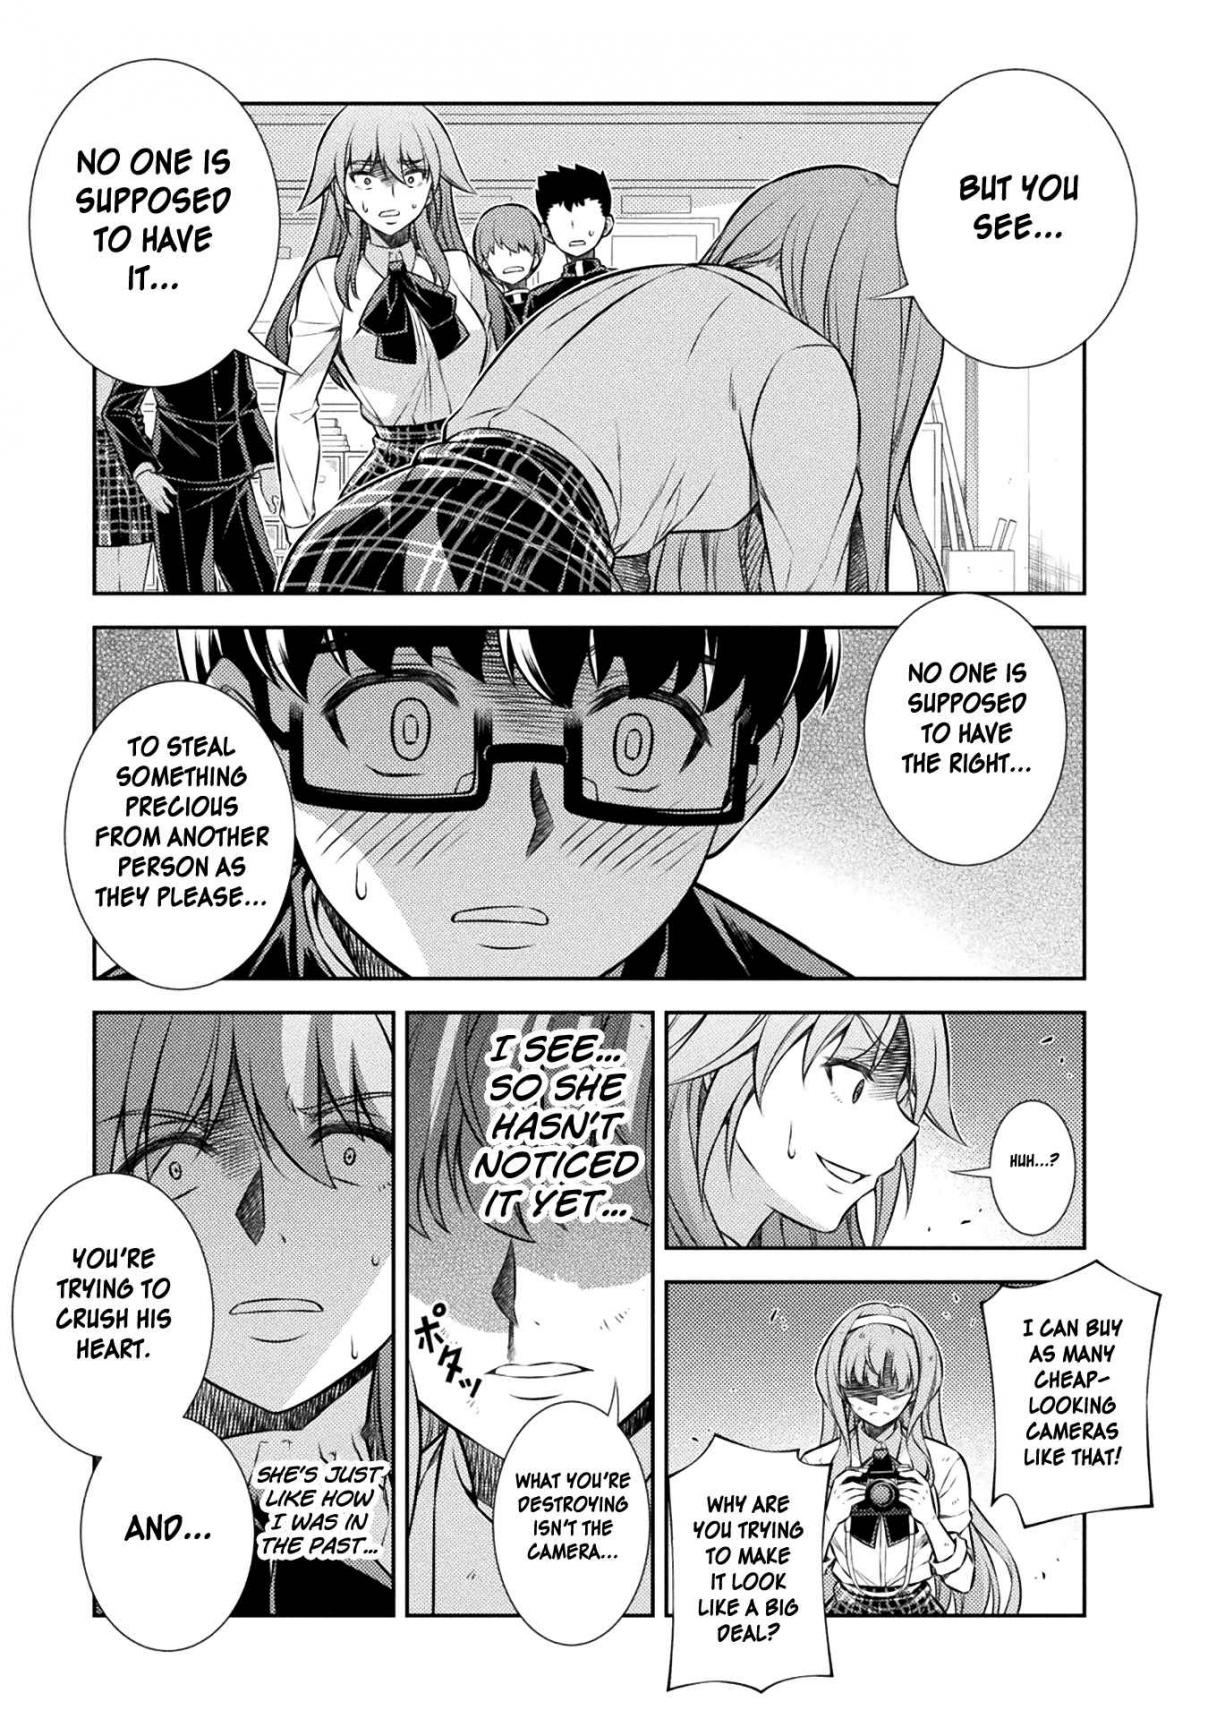 Silver Plan to Redo From JK Vol. 1 Ch. 4 Conditions for Apology